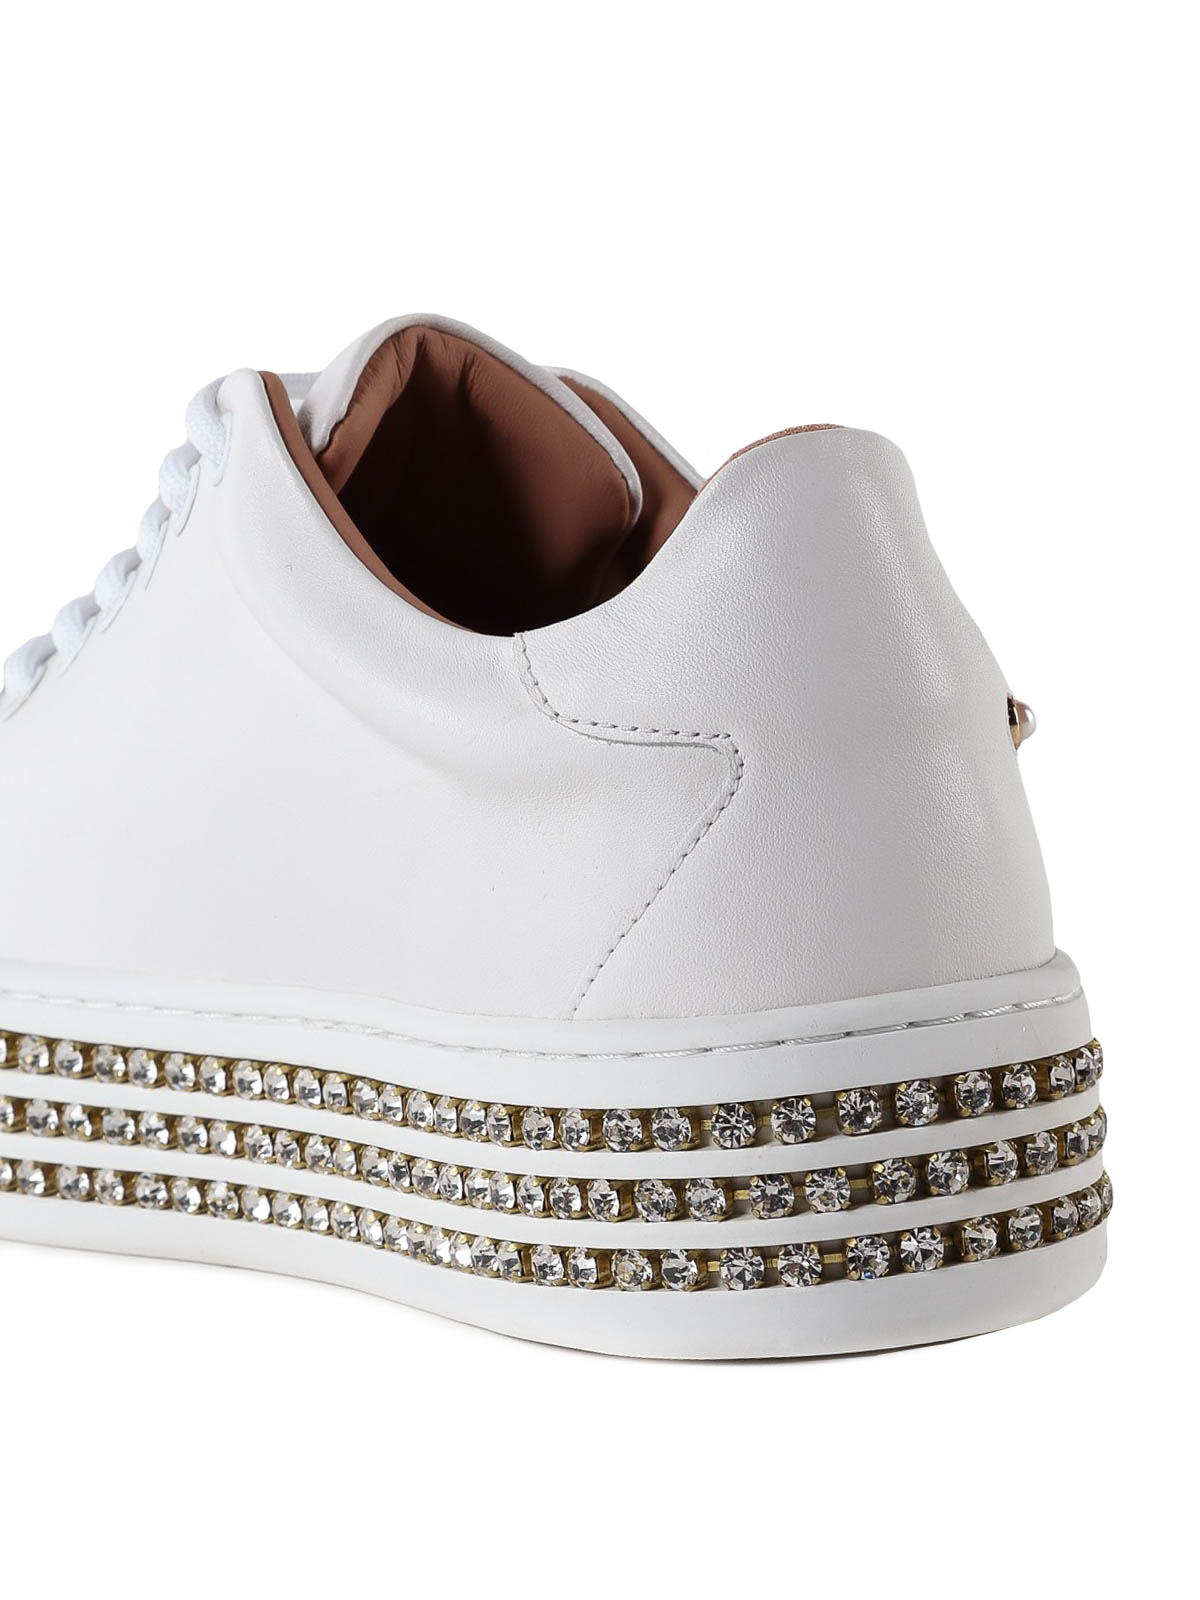 embellished white sneakers